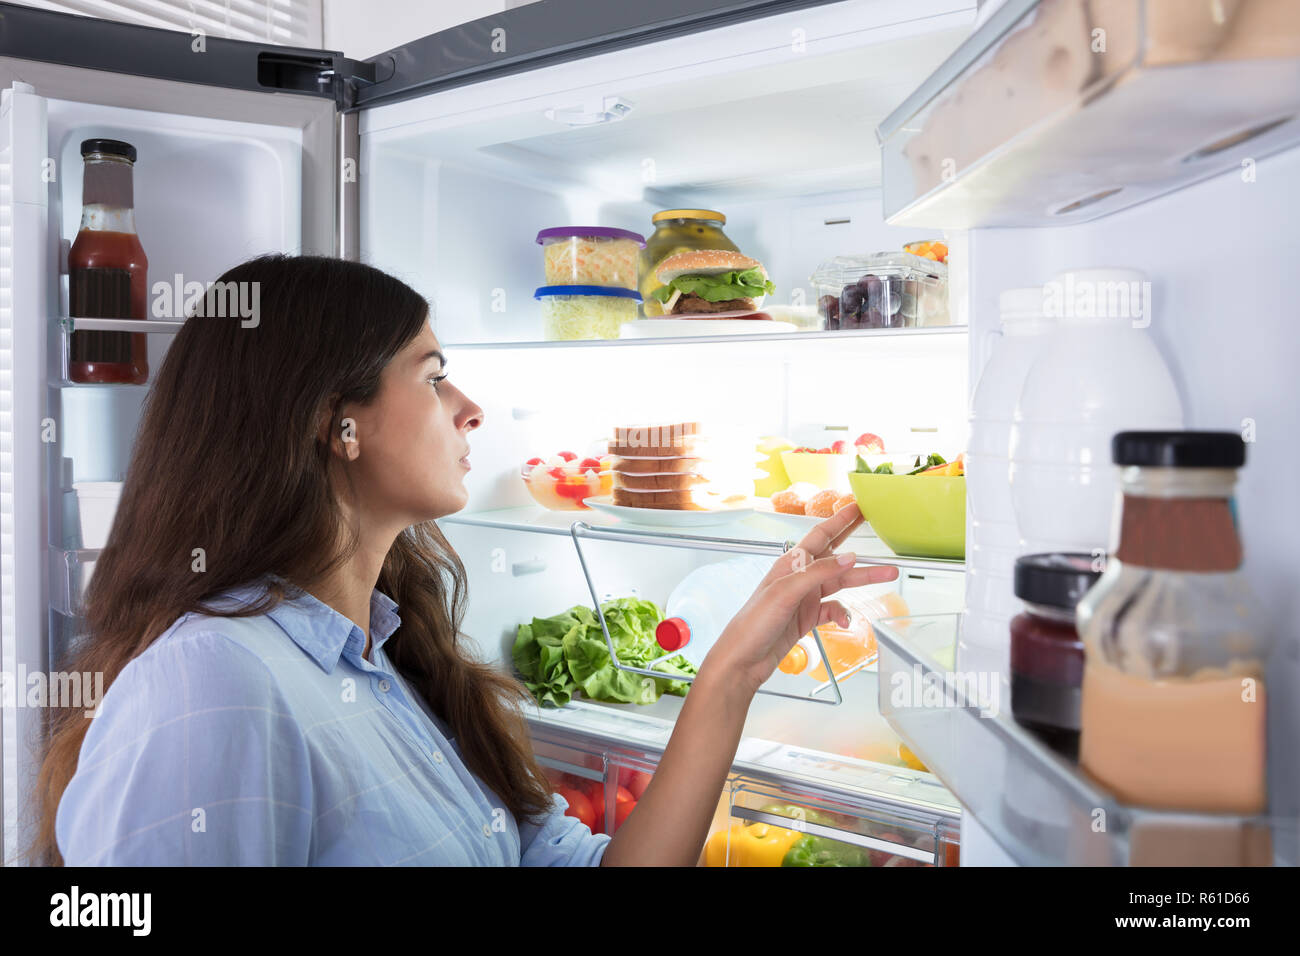 Young Woman Looking At Food In Refrigerator Stock Photo